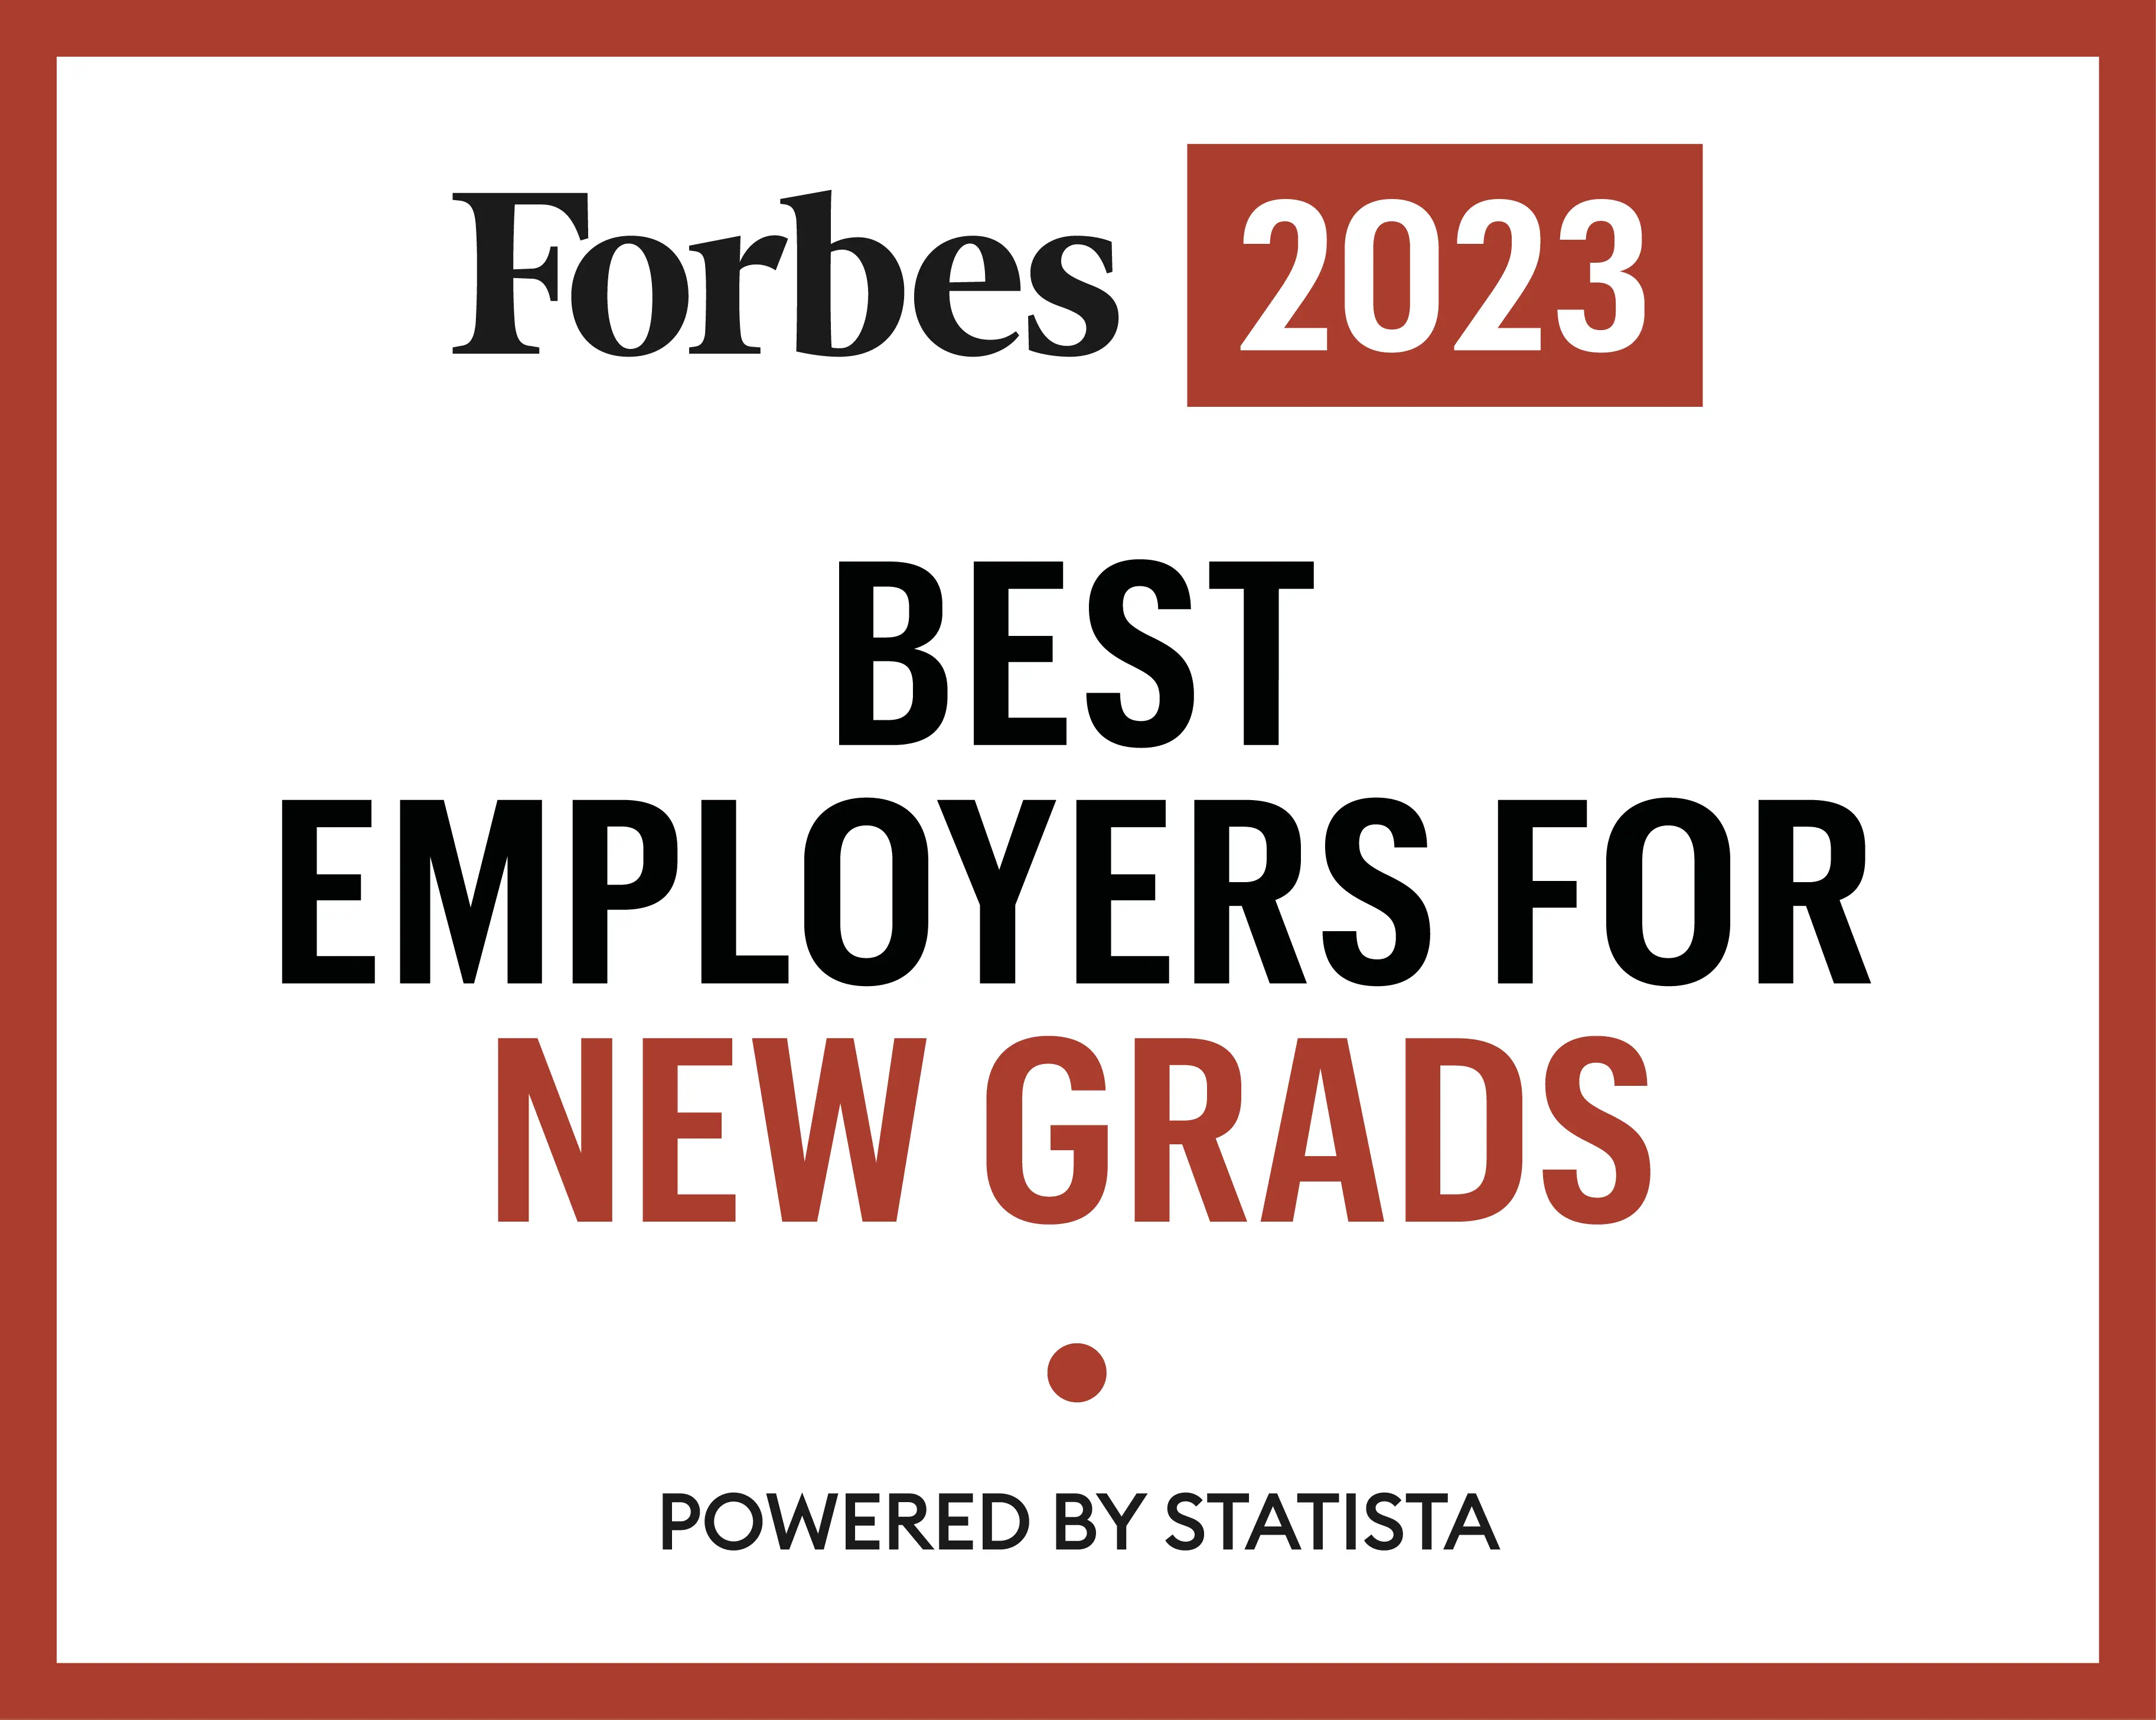 Forbes 2023 BEST EMPLOYERS FOR NEW GRADS